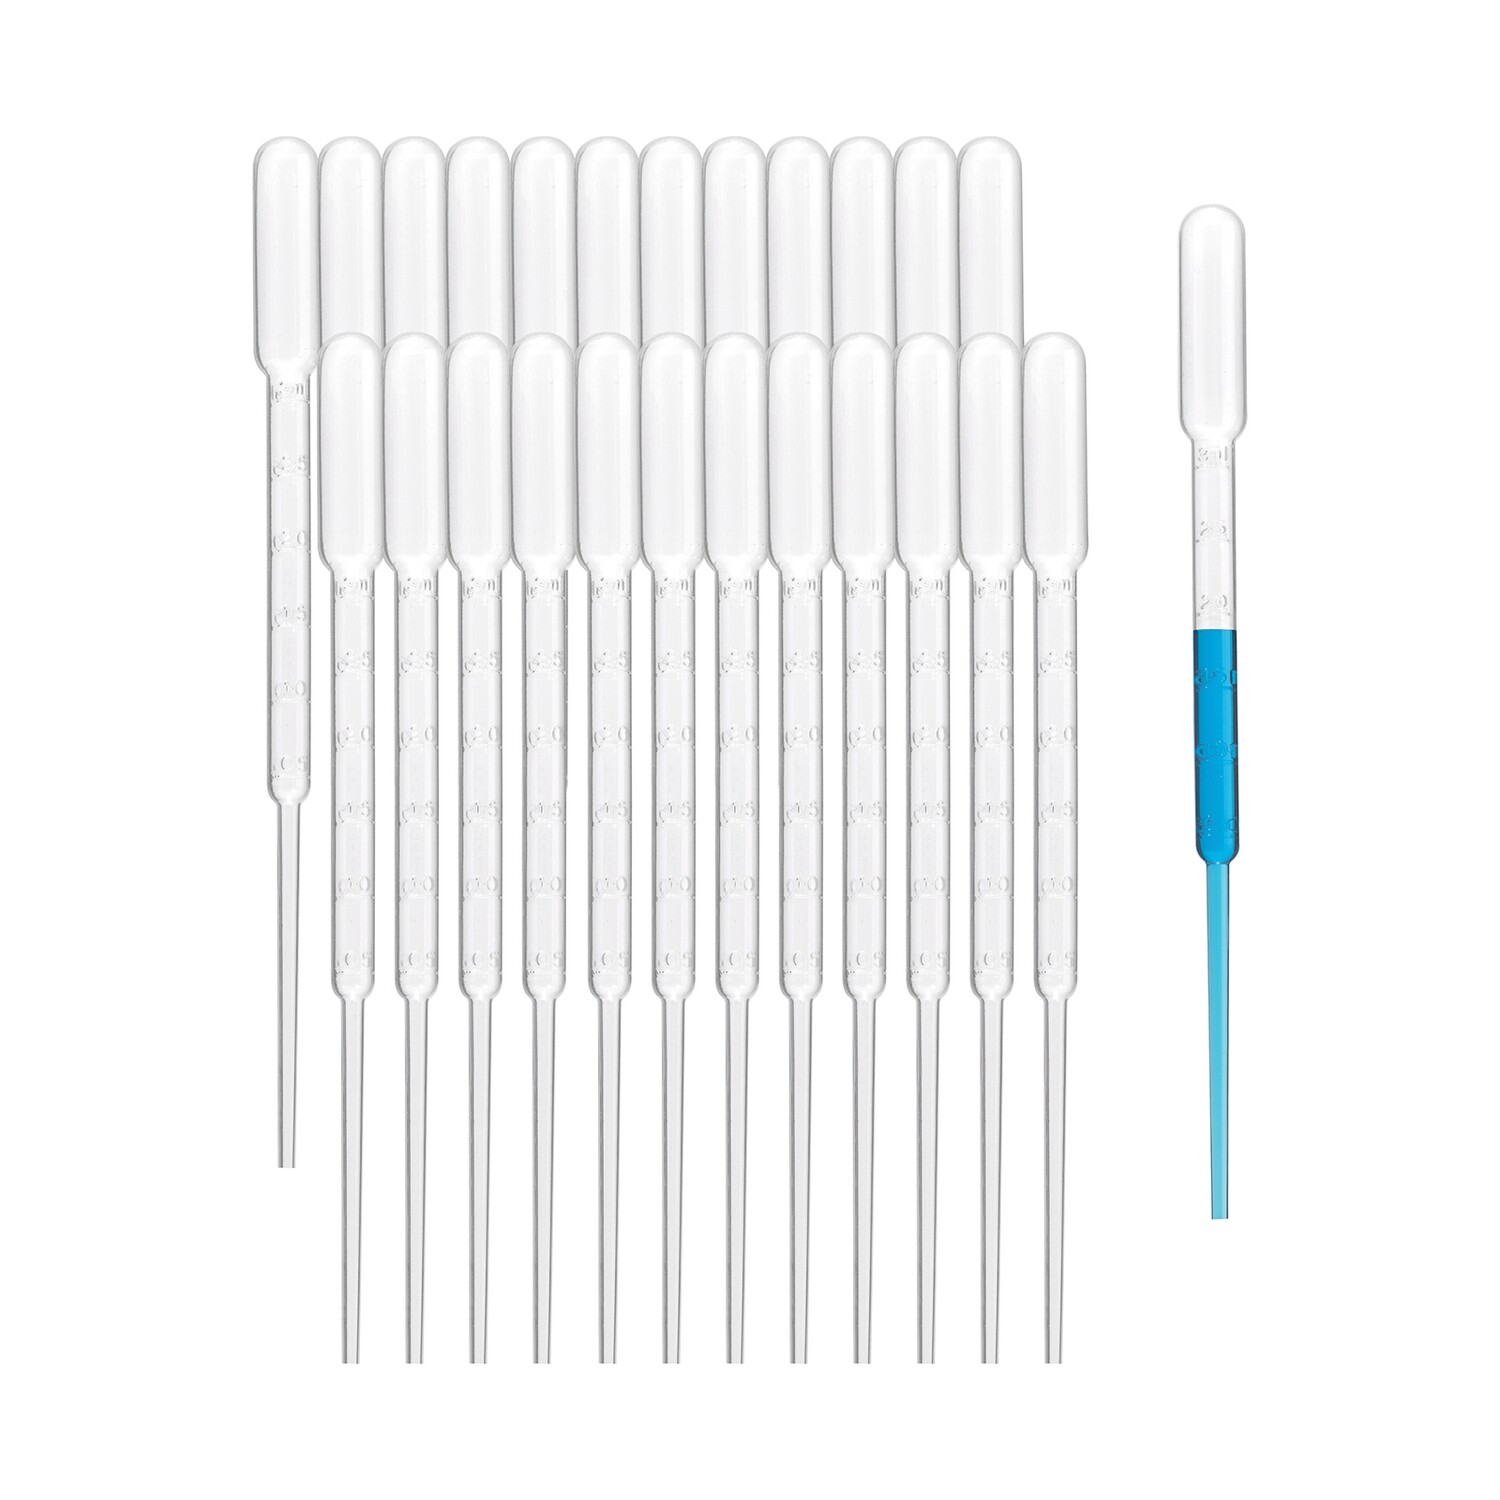 Biologix 3ml Transfer Pipettes, 183mm Individually Wrapped, 500/Pack, 2000/Case